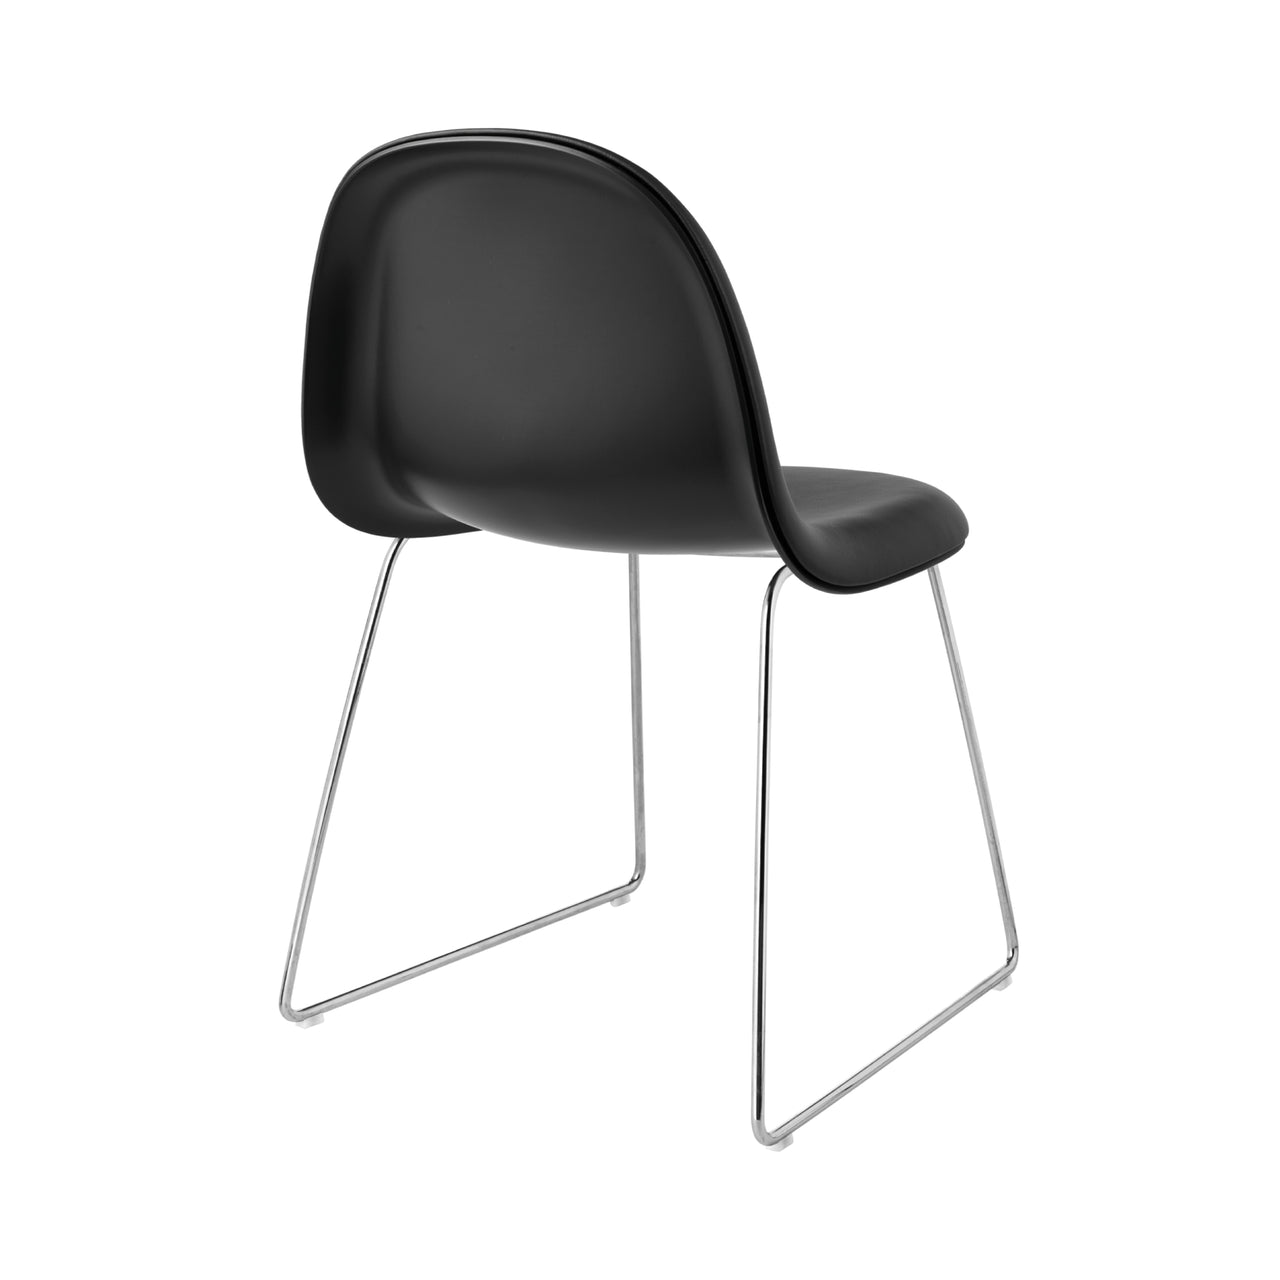 3D Dining Chair Stacking Sledge Base: Plastic Shell + Front Upholstered + Chrome